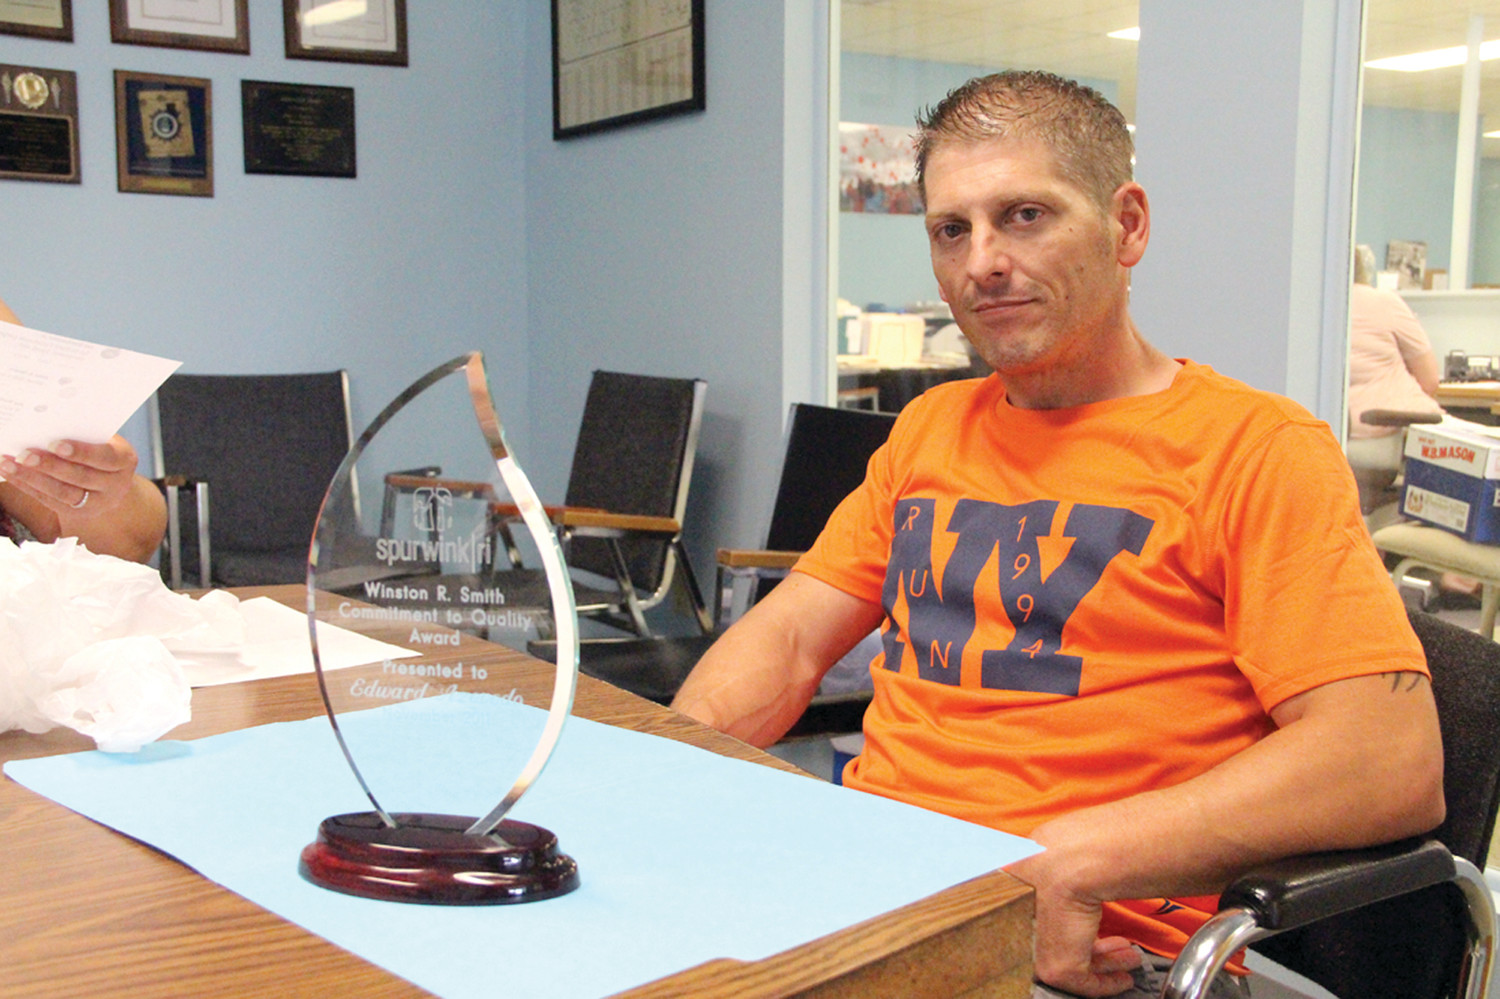 ANGERED: Eddie Azevedo, owner of Eddie’s Diner where the confrontation between him and John Sears happened, said he’s angry with the “slander” he’s been subject to online. He is pictured with the Spurwink/RI Winston R. Smith Commitment to Quality Award presented to him on Nov. 20, 2011.